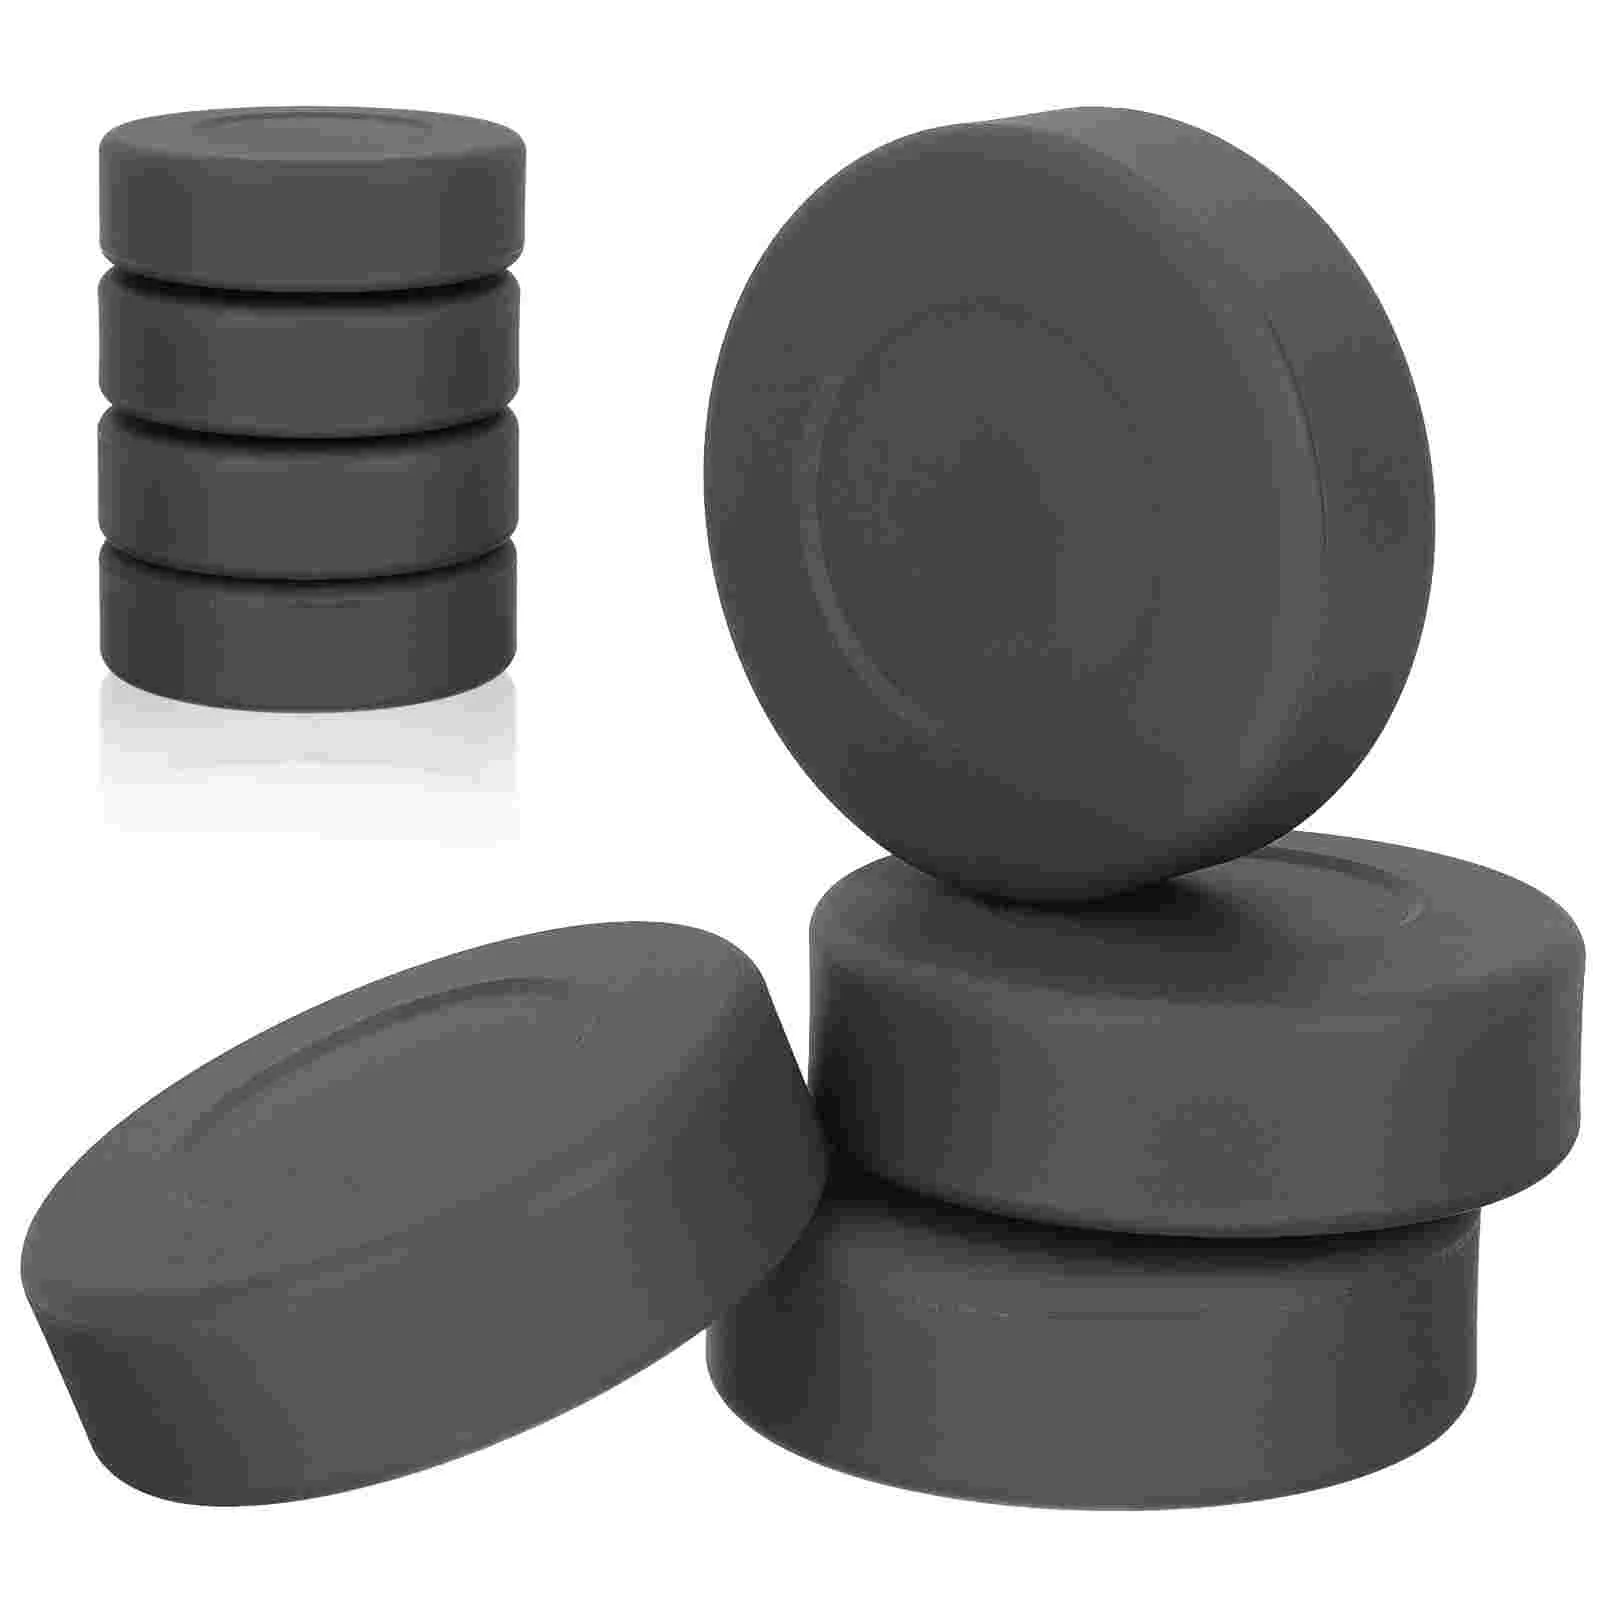 

4 Pcs Hockey Practice Ball Practicing Accessory Puck Air Pucks Outdoor Stuff Sports Official Training Equipment Hokey